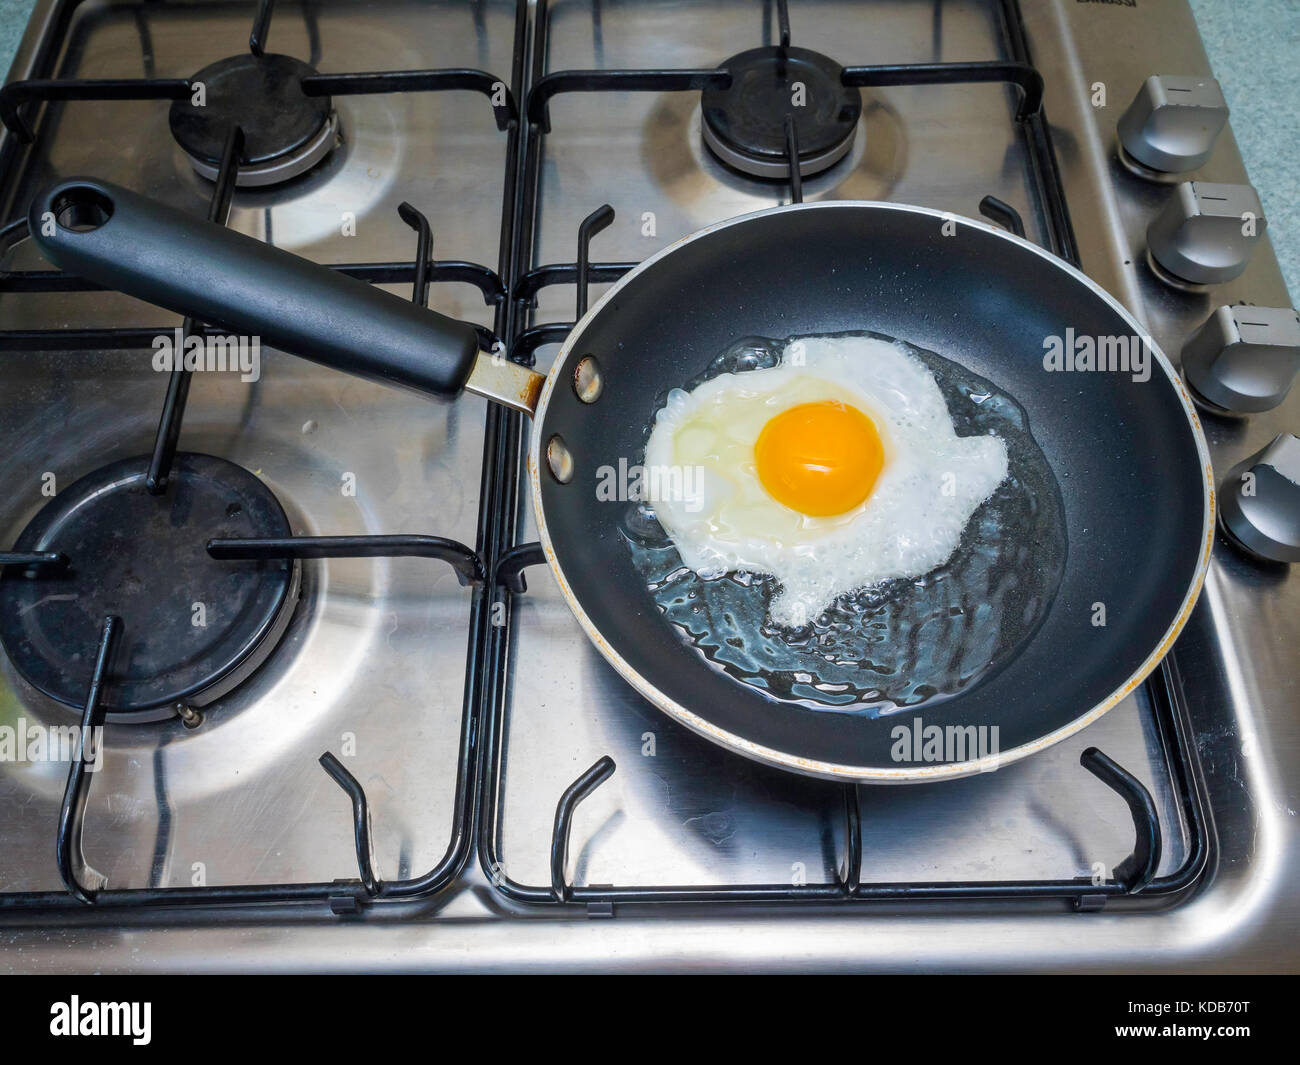 An egg being fried in sunflower oil in a small Teflon coated non stick frying pan on a gas hob Stock Photo